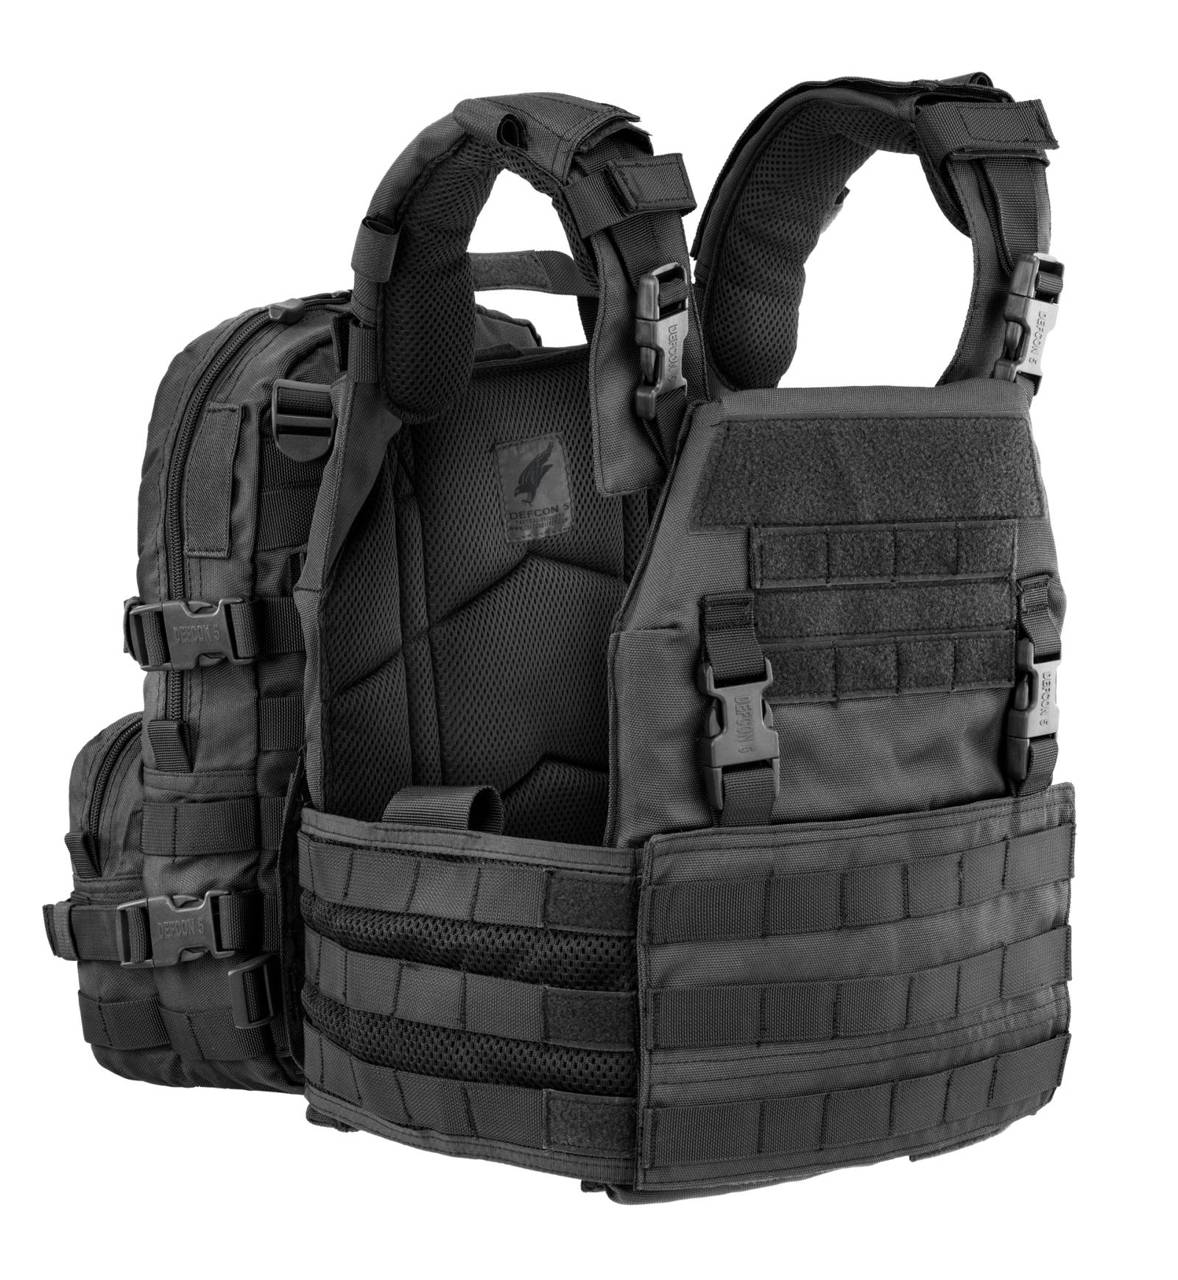 TACTICAL VEST FOR BALLISTIC PLATES - WITH INTEGRATED BACKPACK - Defcon 5® -  BLACK Black, Military Tactical \ Tactical Vests \ Tactical Vests,  Harnesses - Camouflage